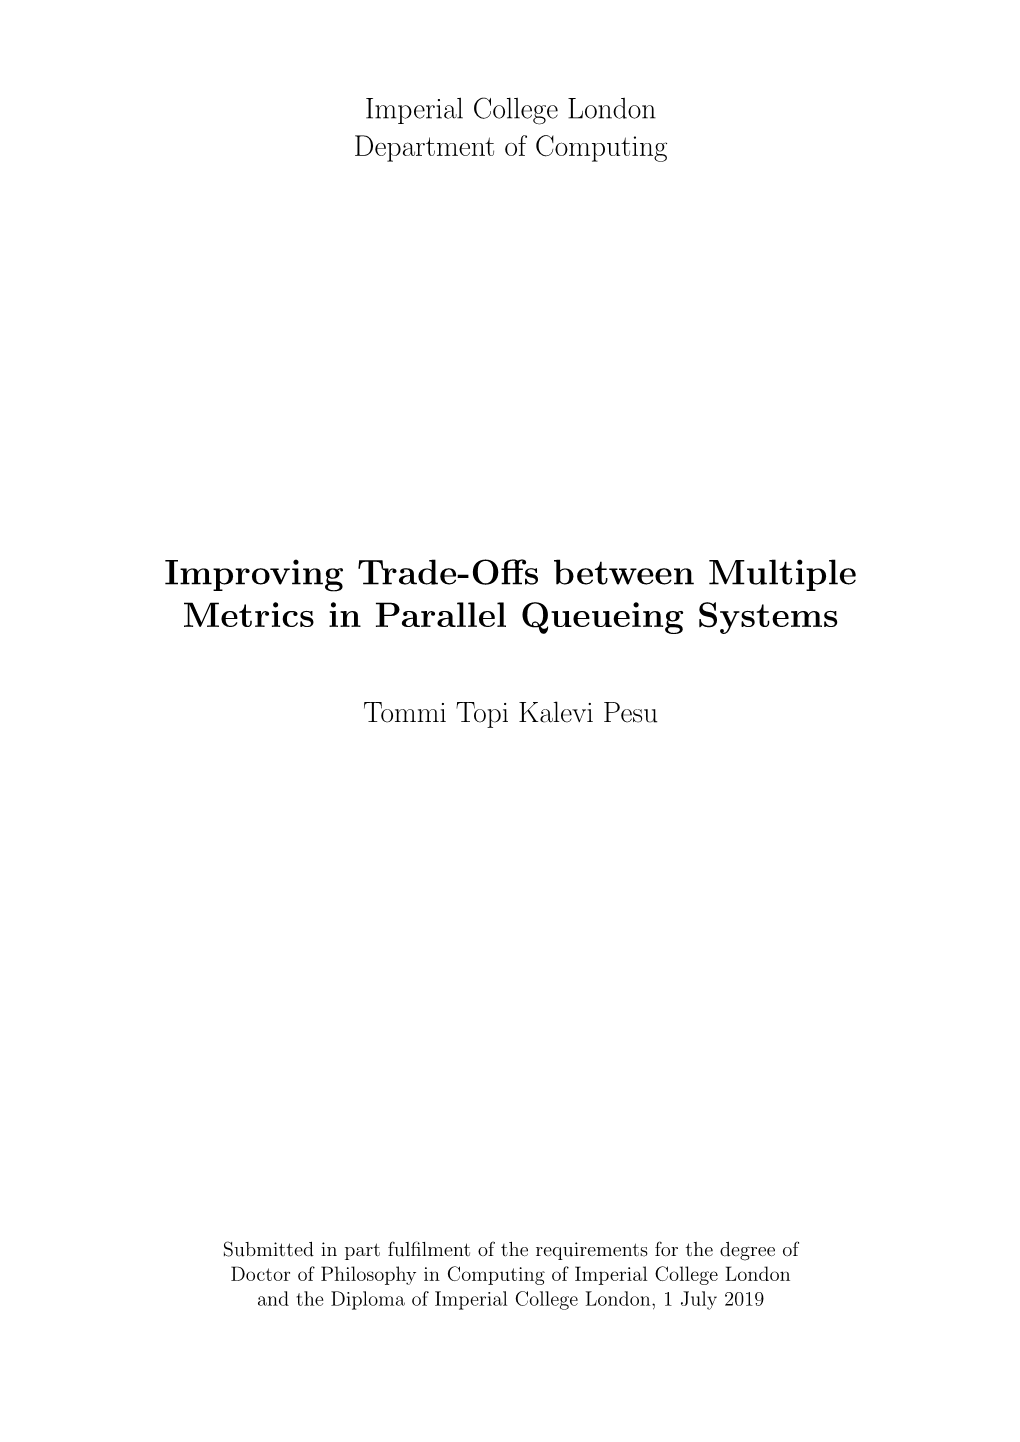 Improving Trade-Offs Between Multiple Metrics in Parallel Queueing Systems